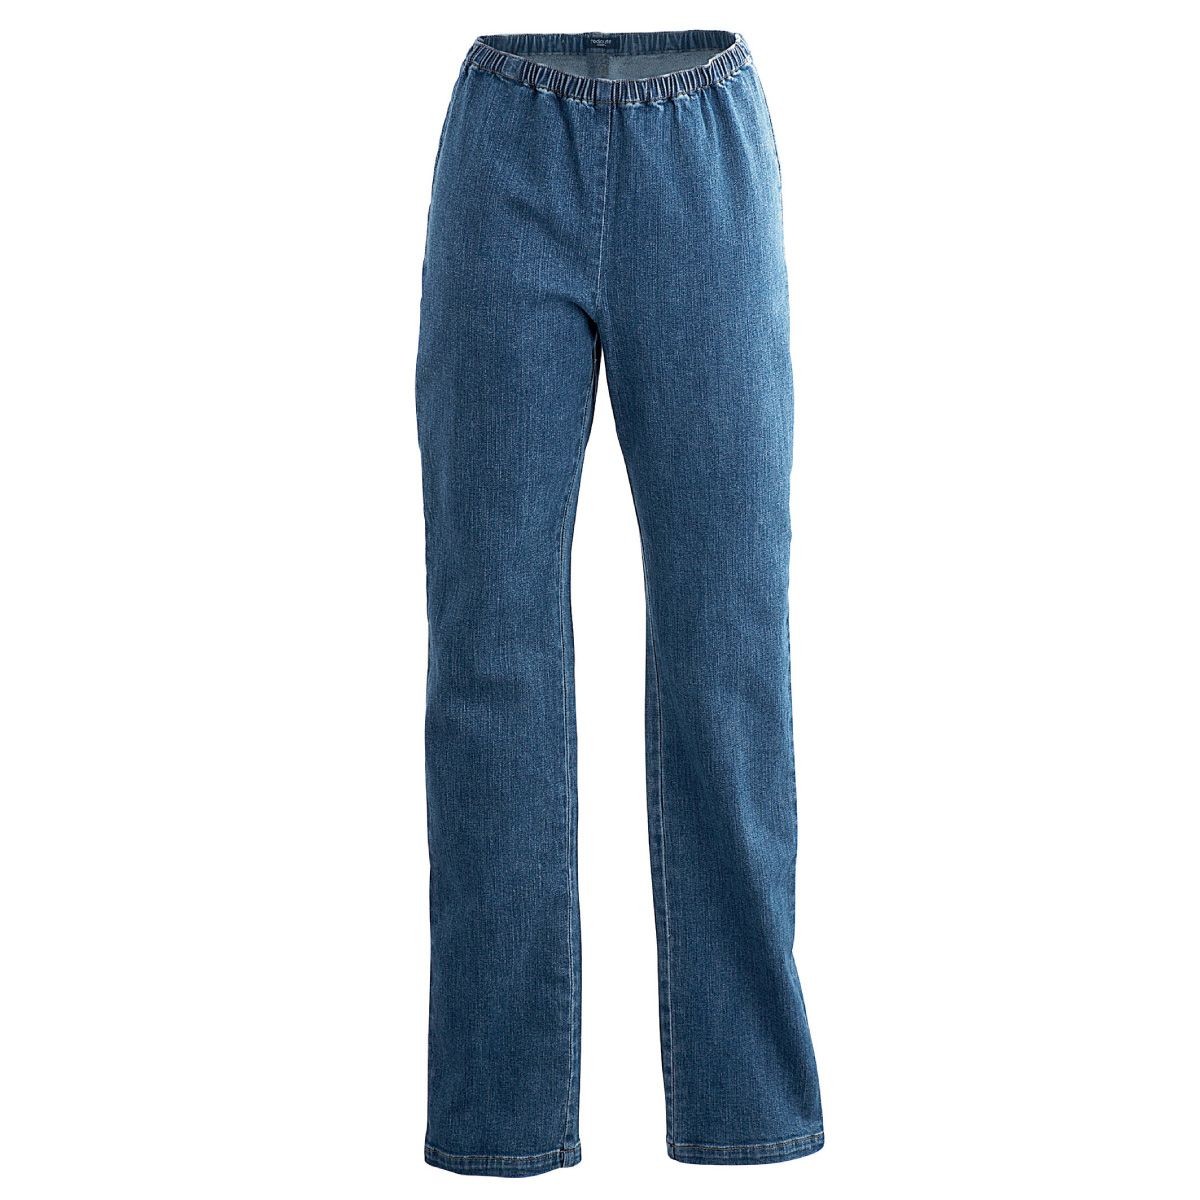 Jeans style trousers stretch denim point